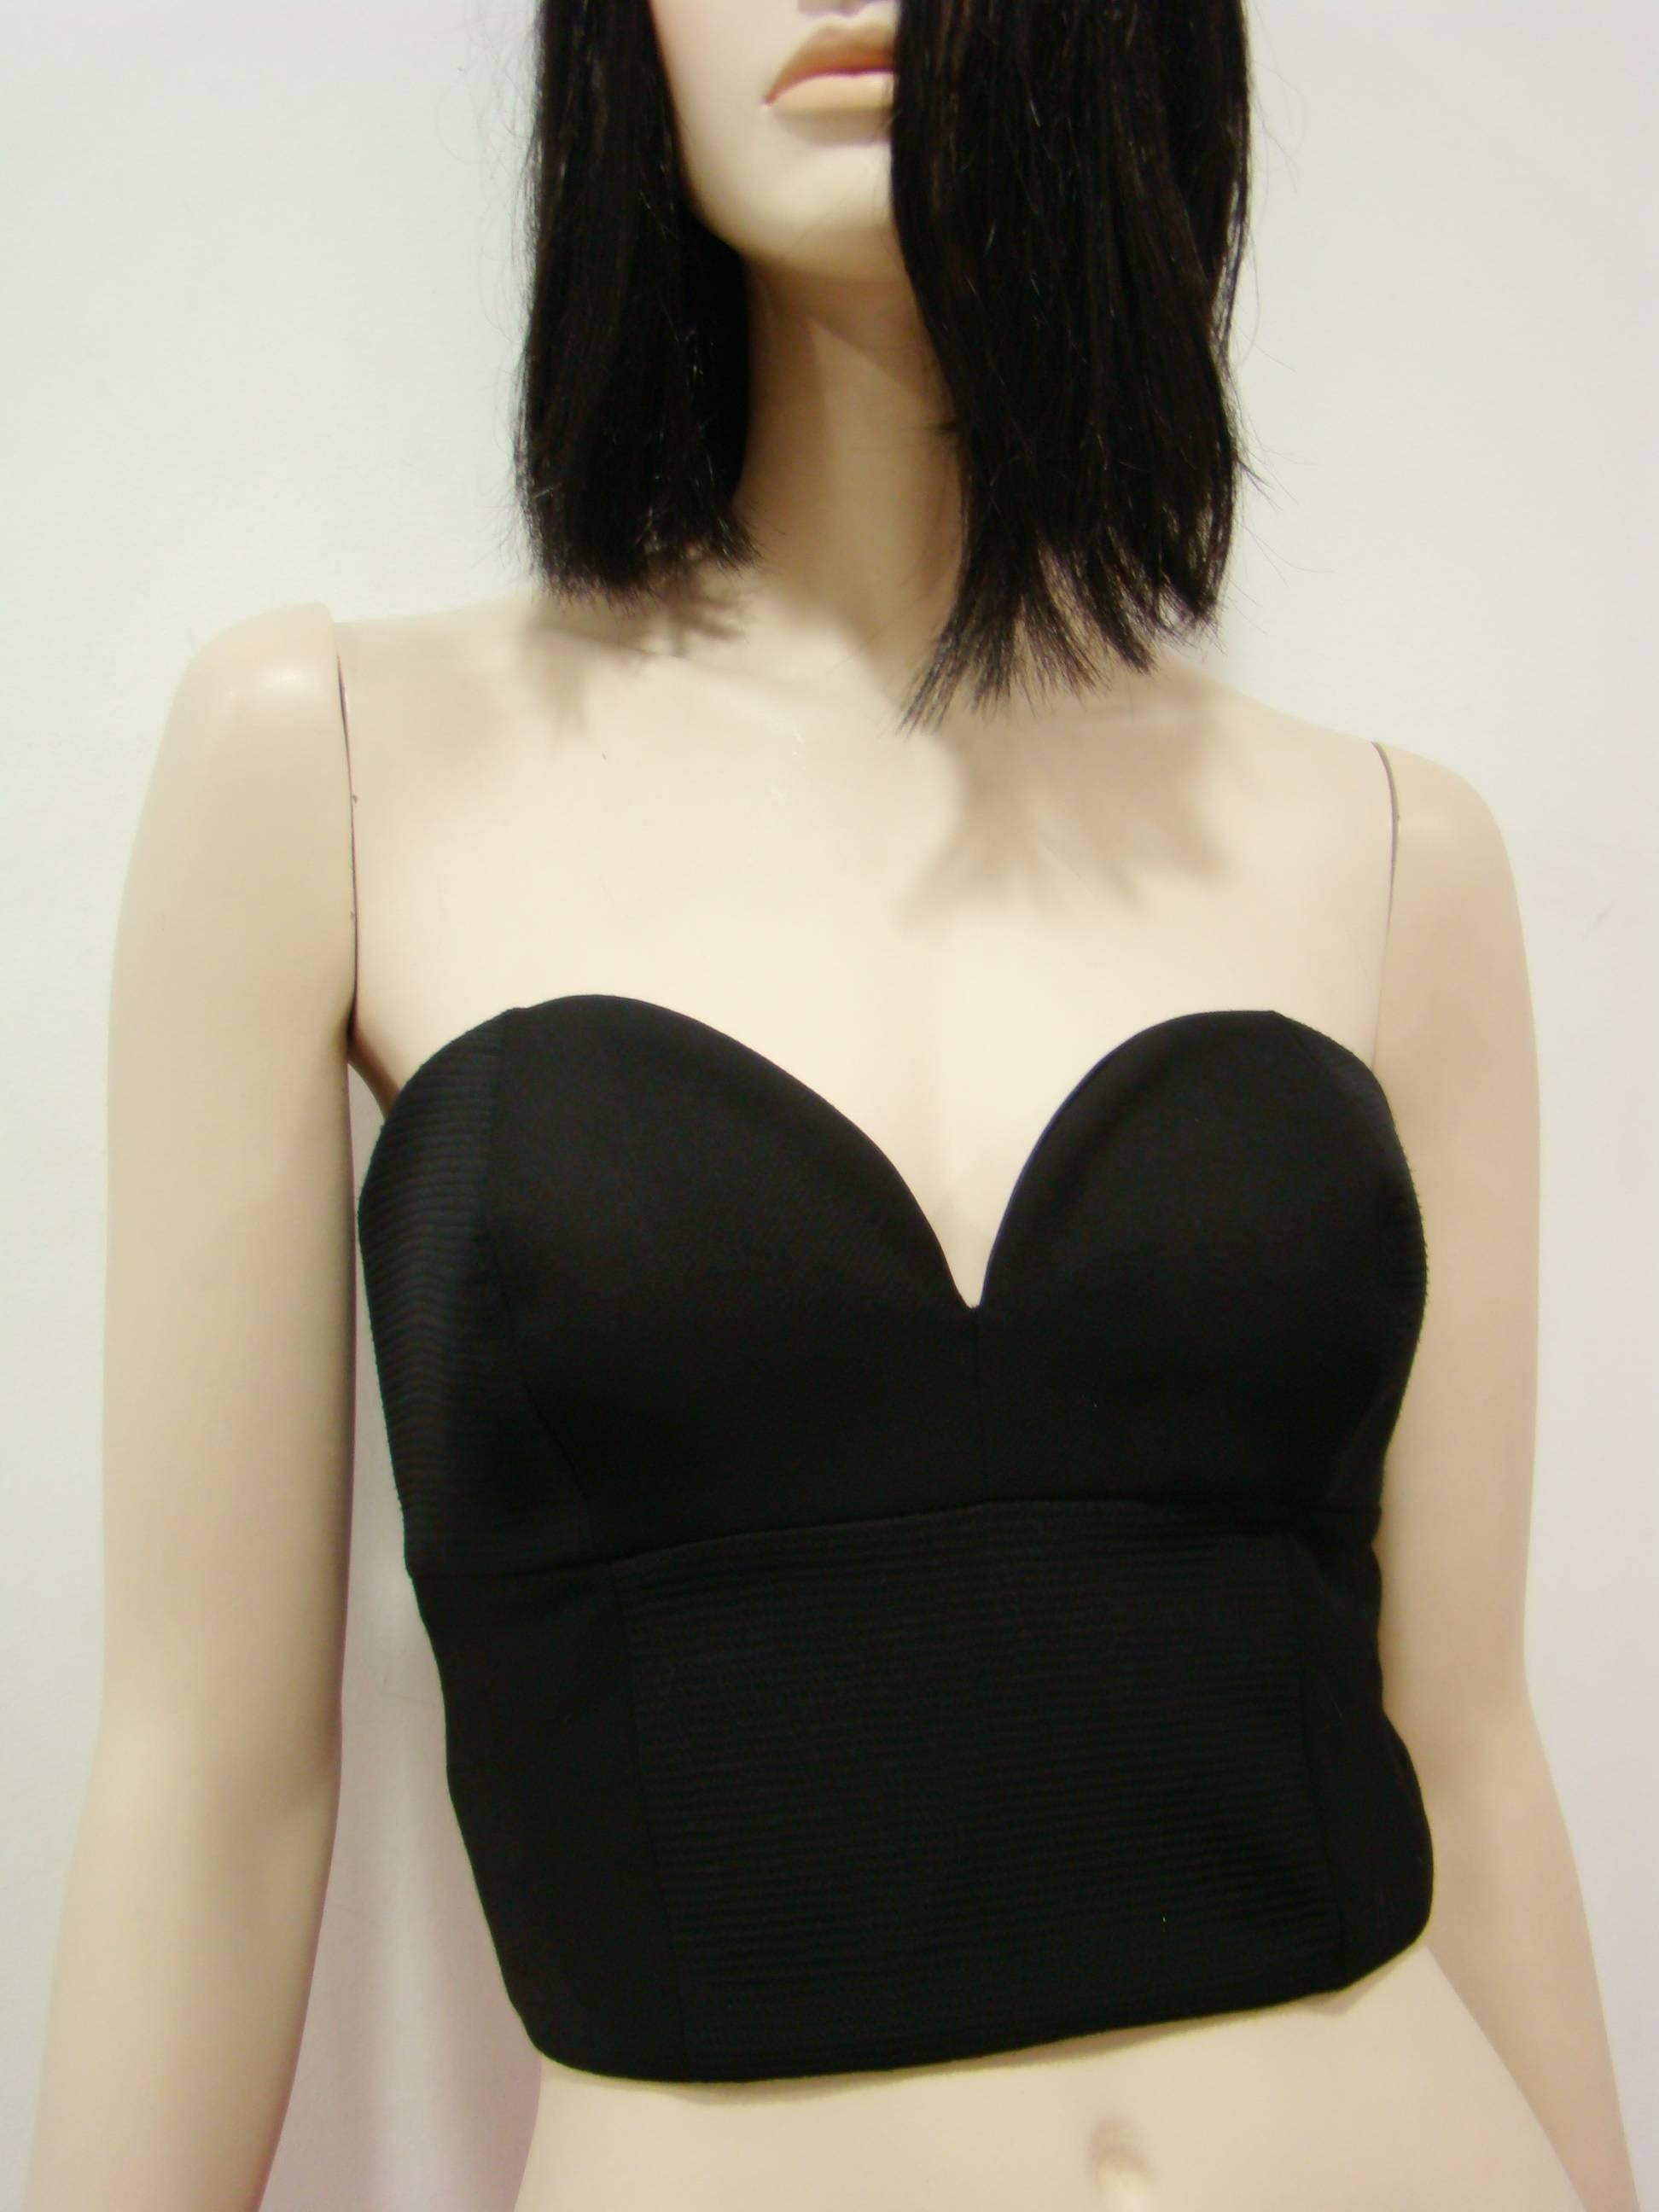 Rare Gianni Versace Couture Black Bustier Top Fall 1992 In New Condition For Sale In Athens, Agia Paraskevi